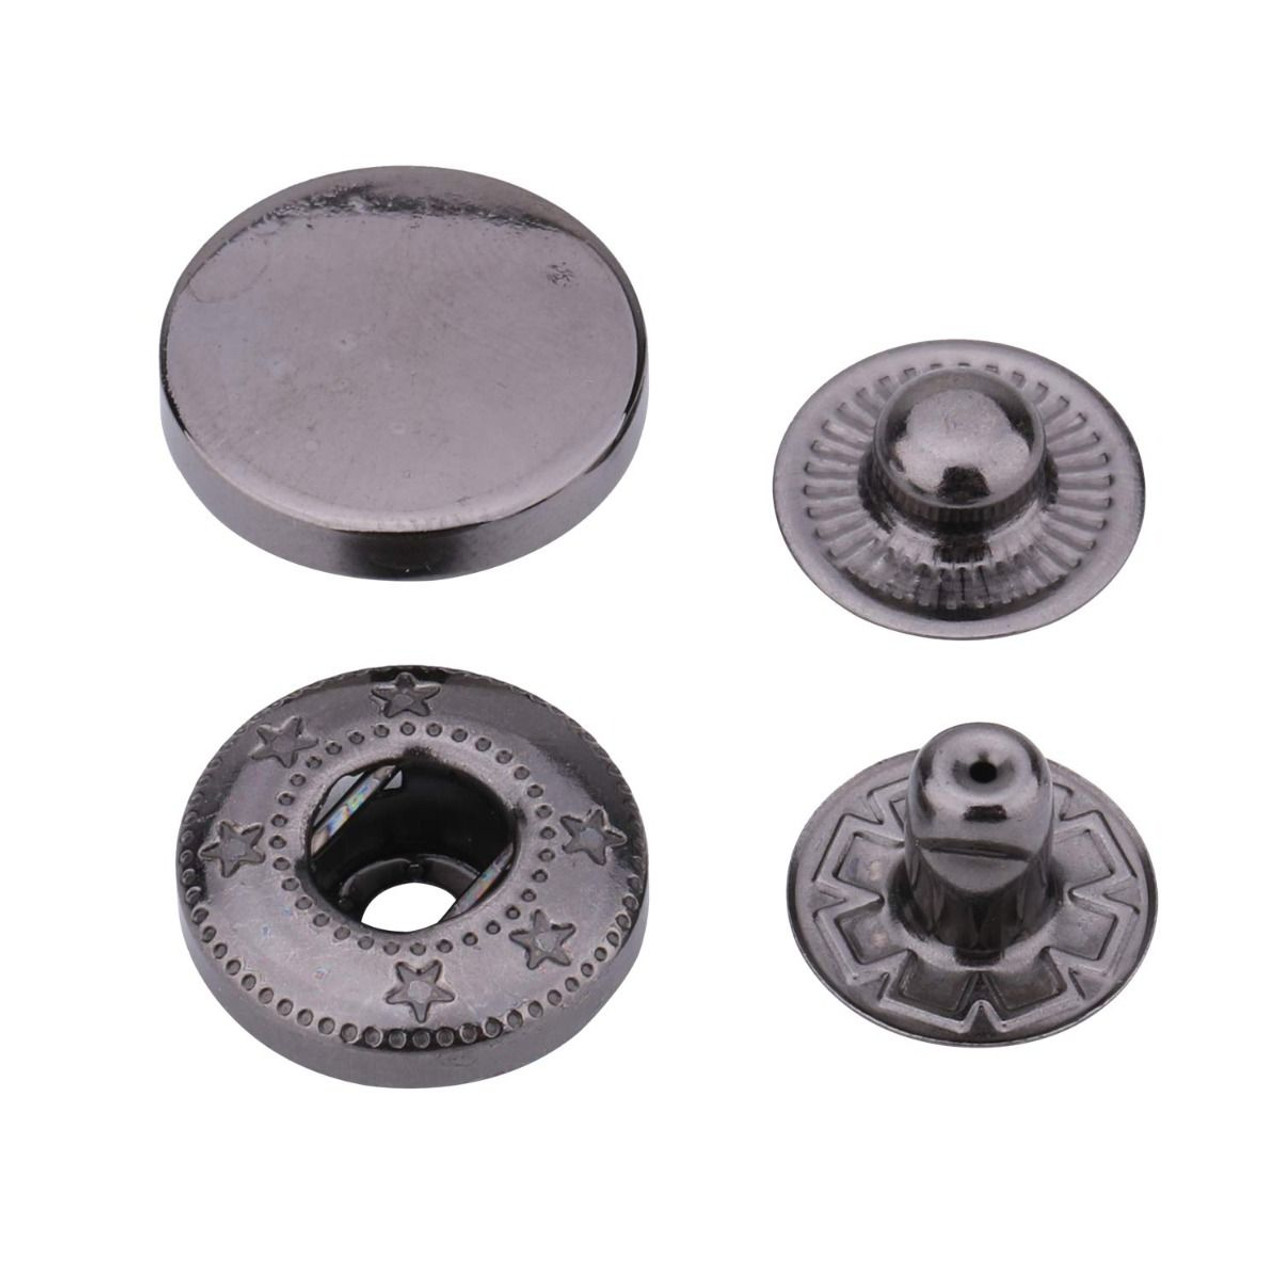 150sets Metal snap buttons 4 part buttons 10/11mm double cap prong snap  buttons fastener press stud buttons FP-010